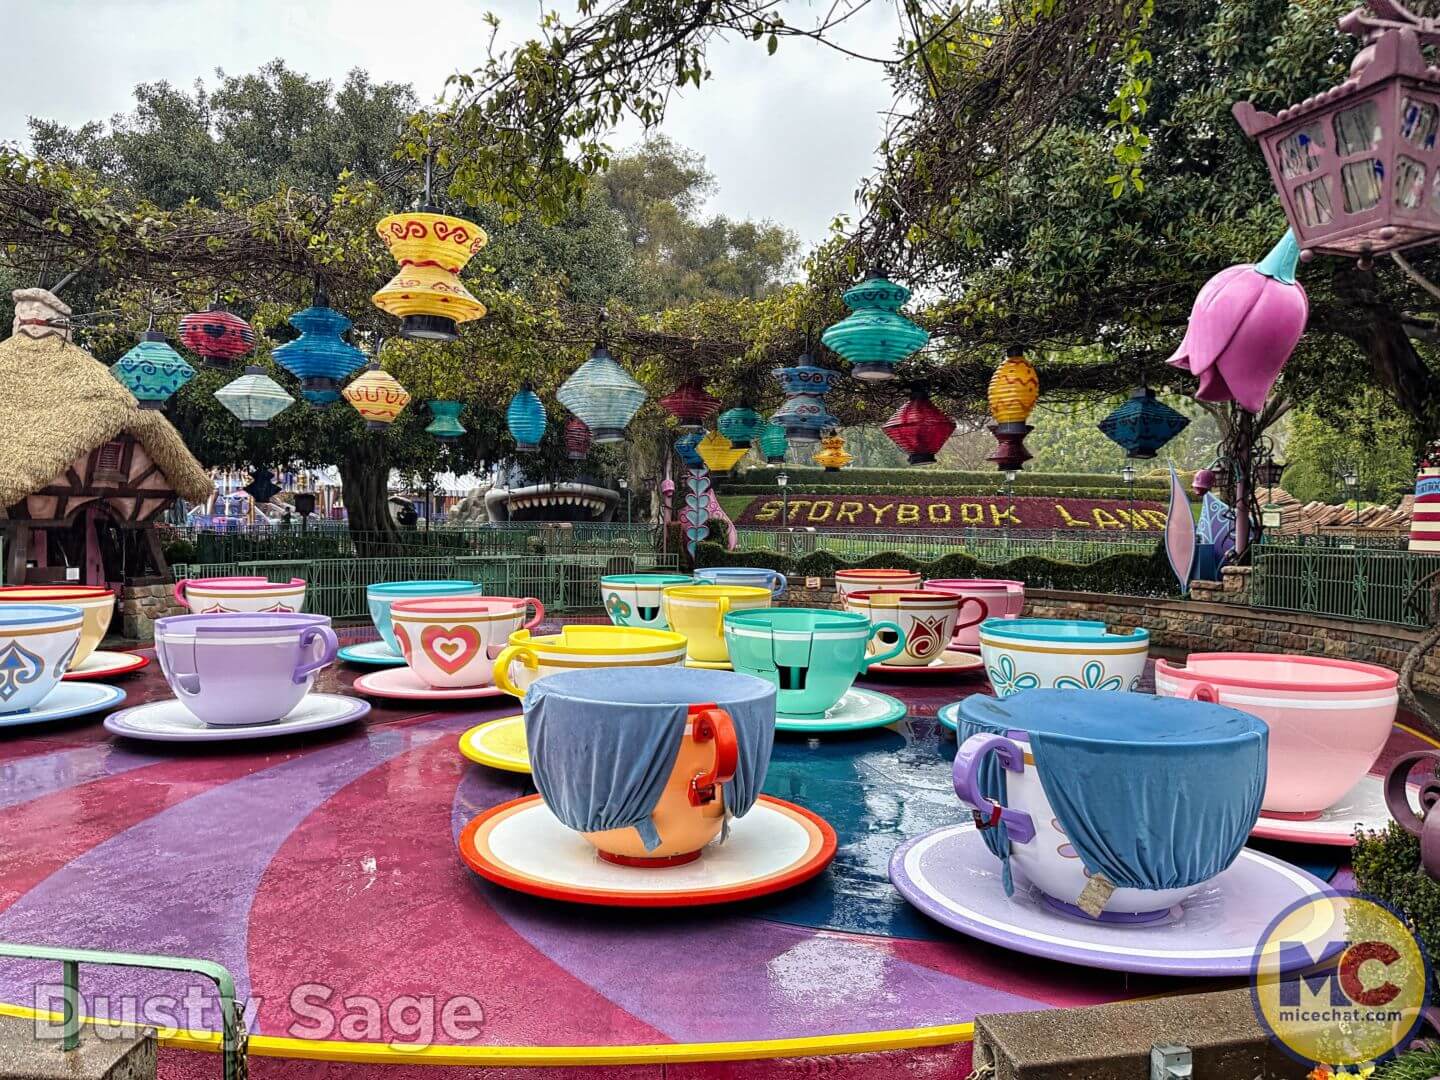 PHOTOS: NEW Alice in Wonderland Tea Cup Mug and Folding Fan Available in  Downtown Disney District - WDW News Today